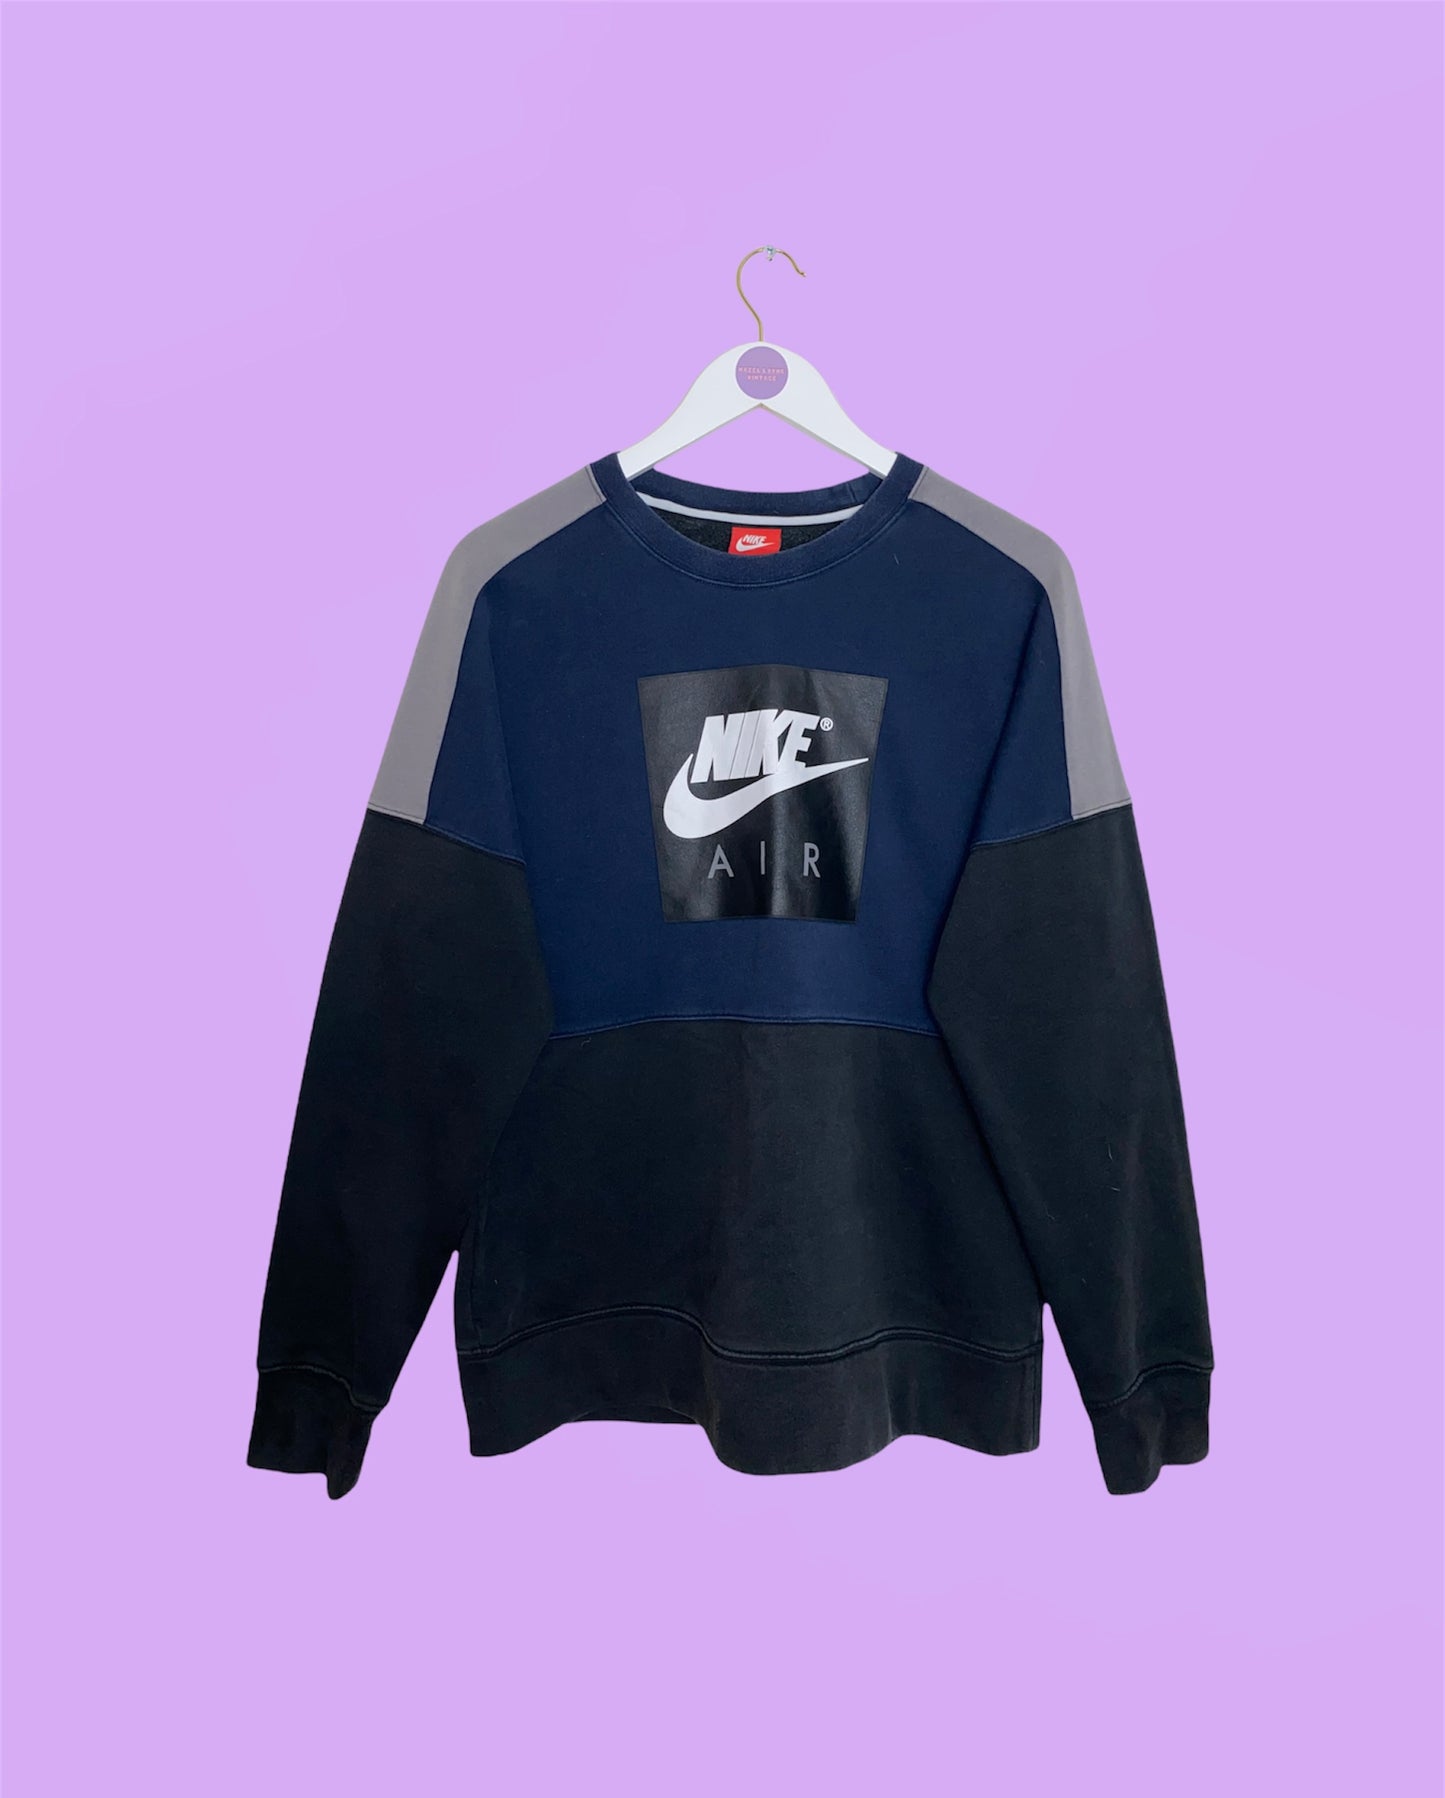 navy and black cropped sweatshirt with white nike logo shown on a white clothes hanger on a lilac background